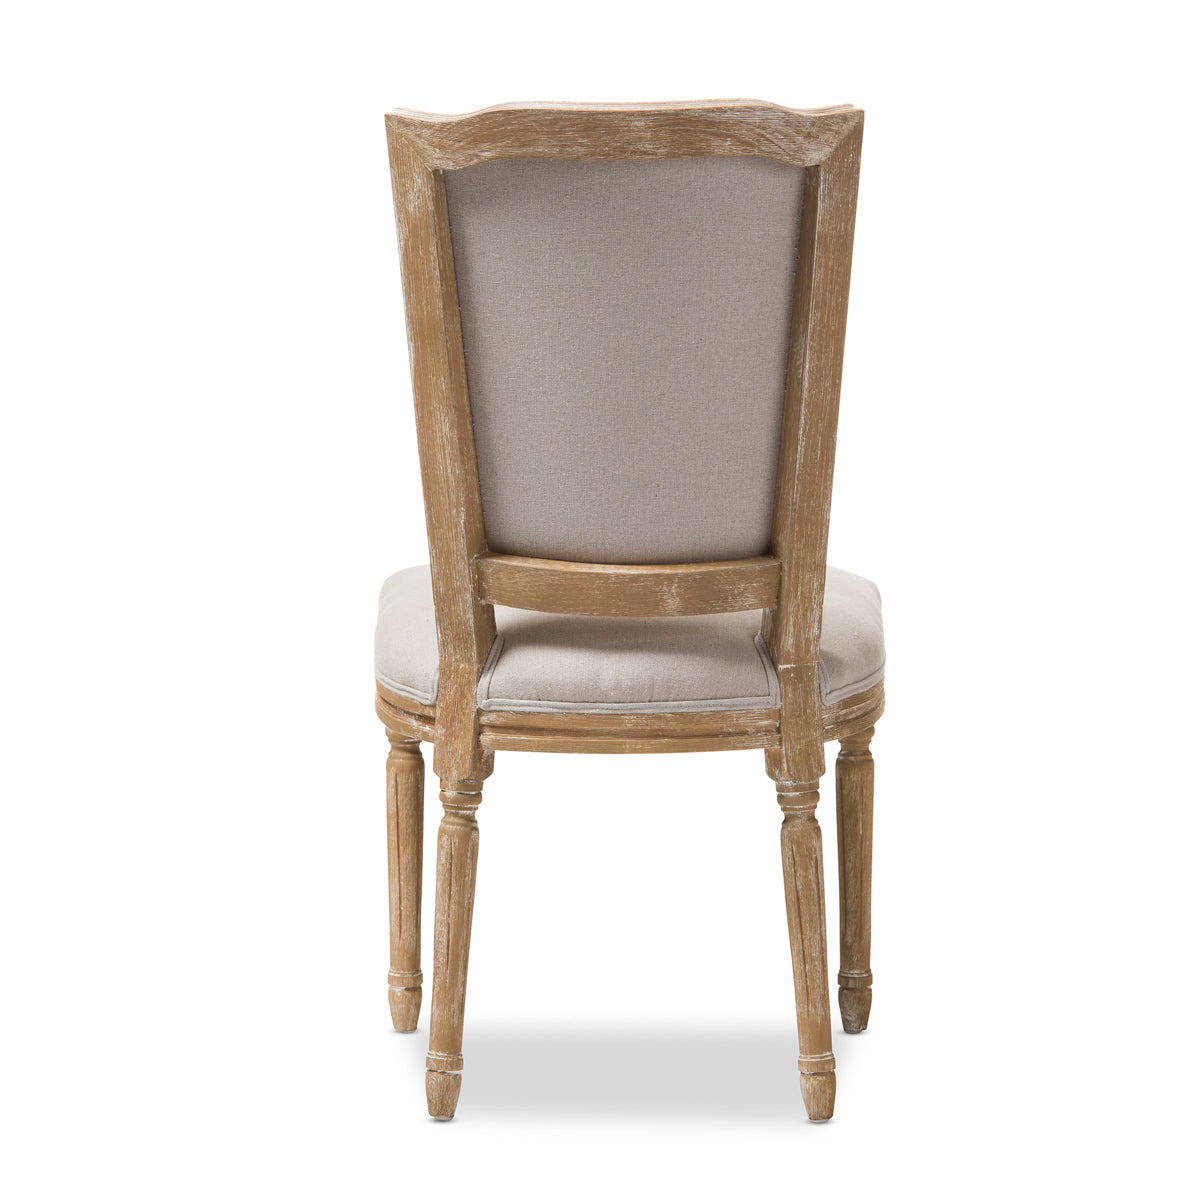 Baxton Studio Cadencia French Vintage Cottage Weathered Oak Finish Wood and Beige Fabric Upholstered Dining Side Chair Baxton Studio-dining chair-Minimal And Modern - 5